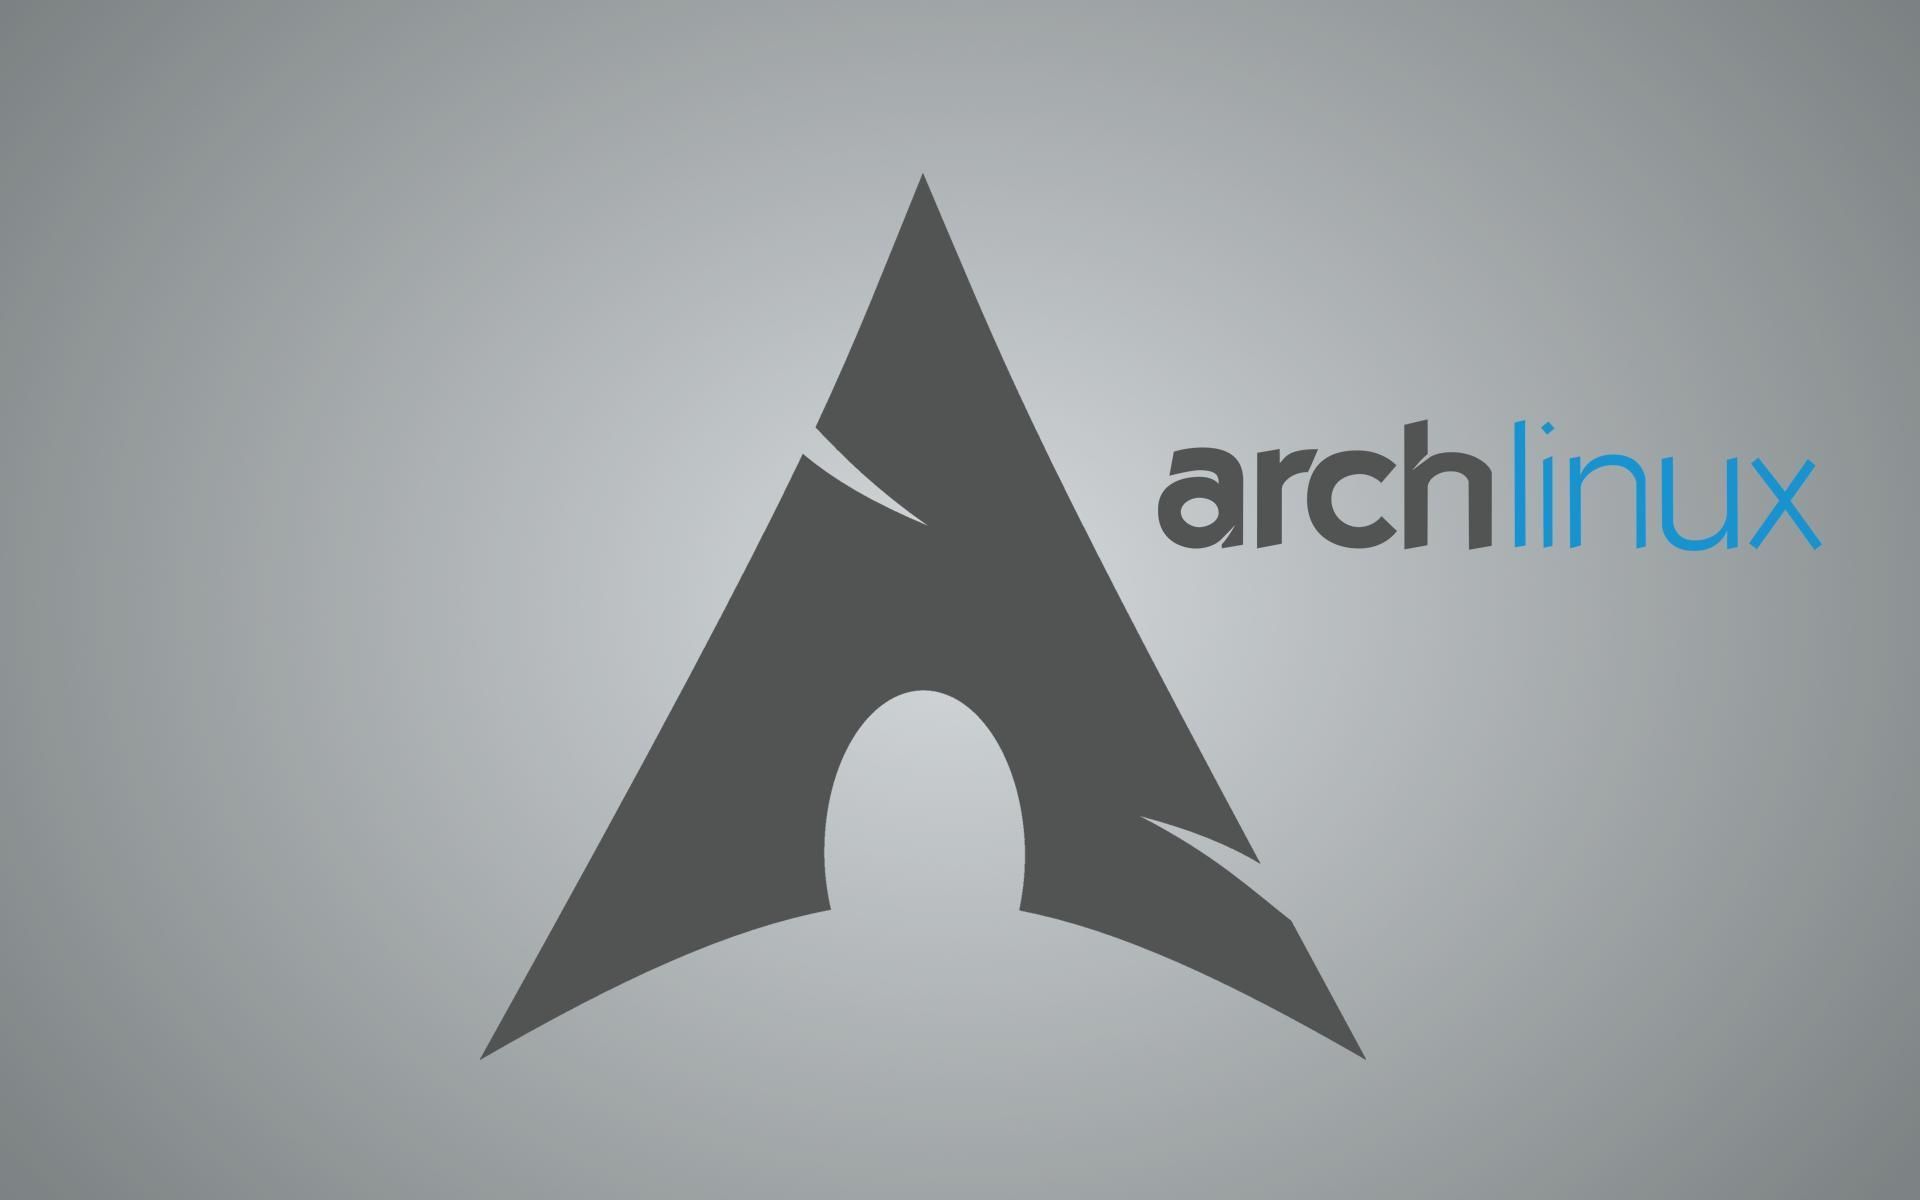 Caledonia Arch Linux Wallpaper / Artwork and Screenshots / Arch